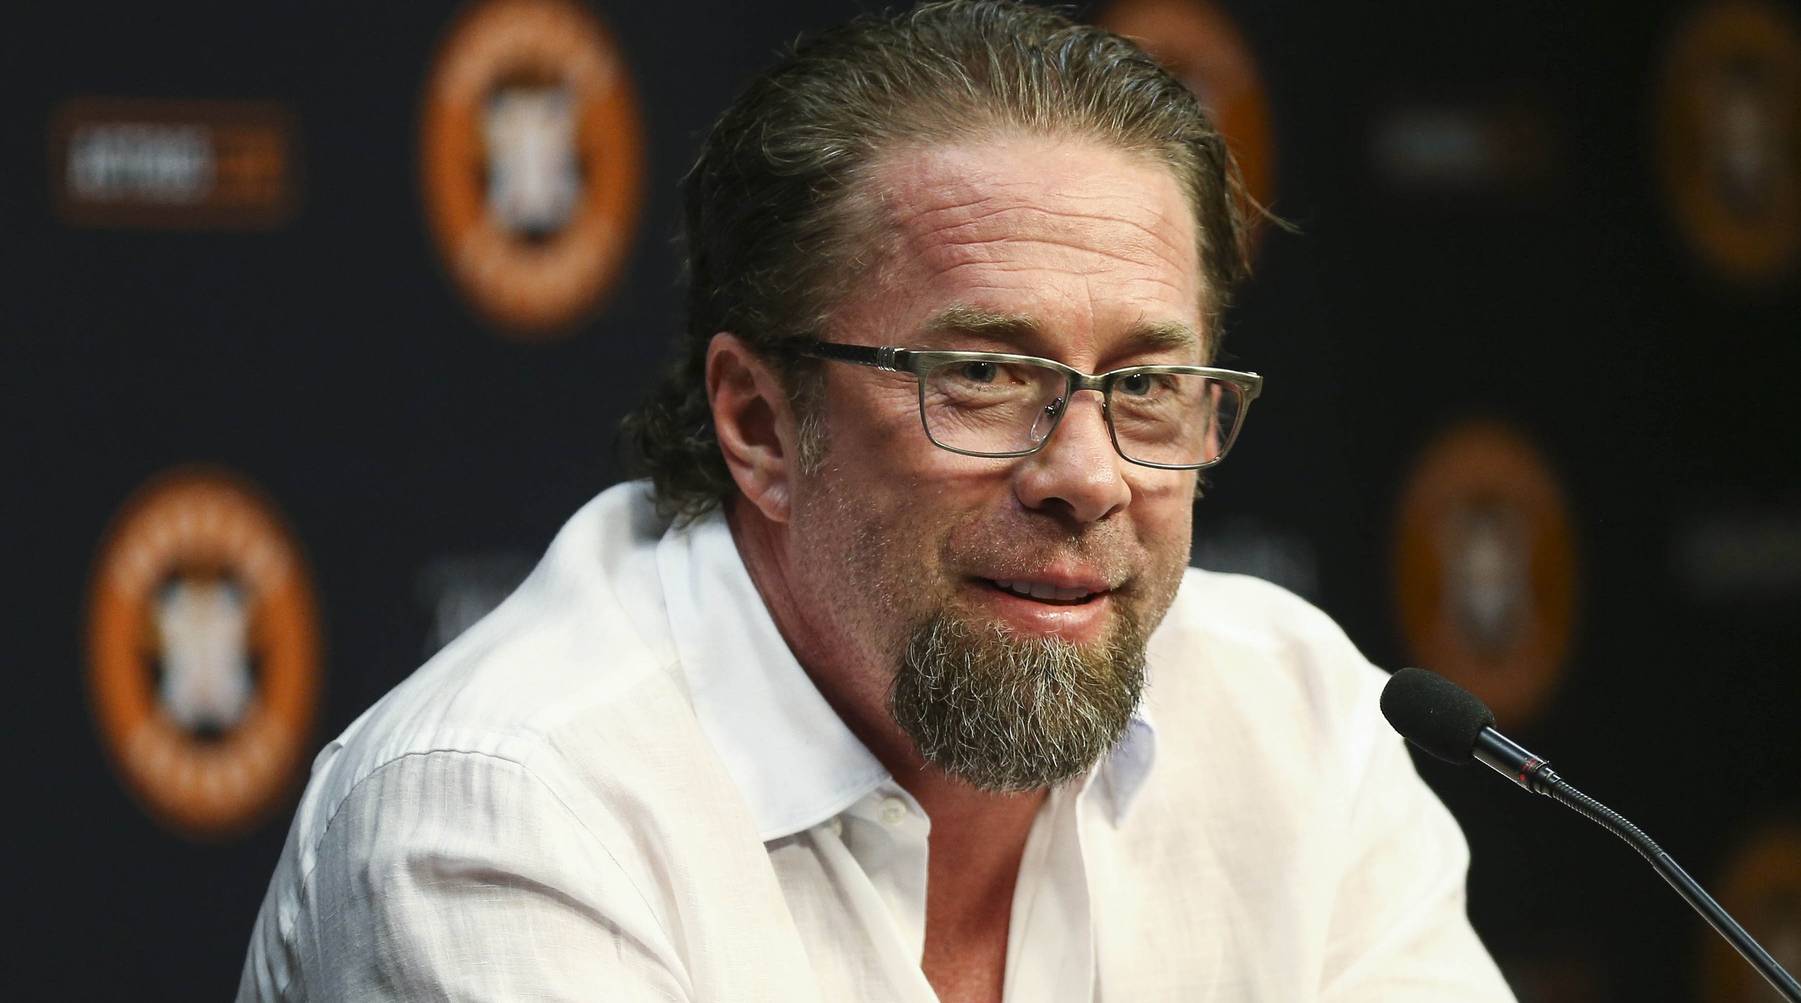 Hall of Famer Jeff Bagwell Explains Why He Thinks ‘Moneyball’ is a ‘Farce’